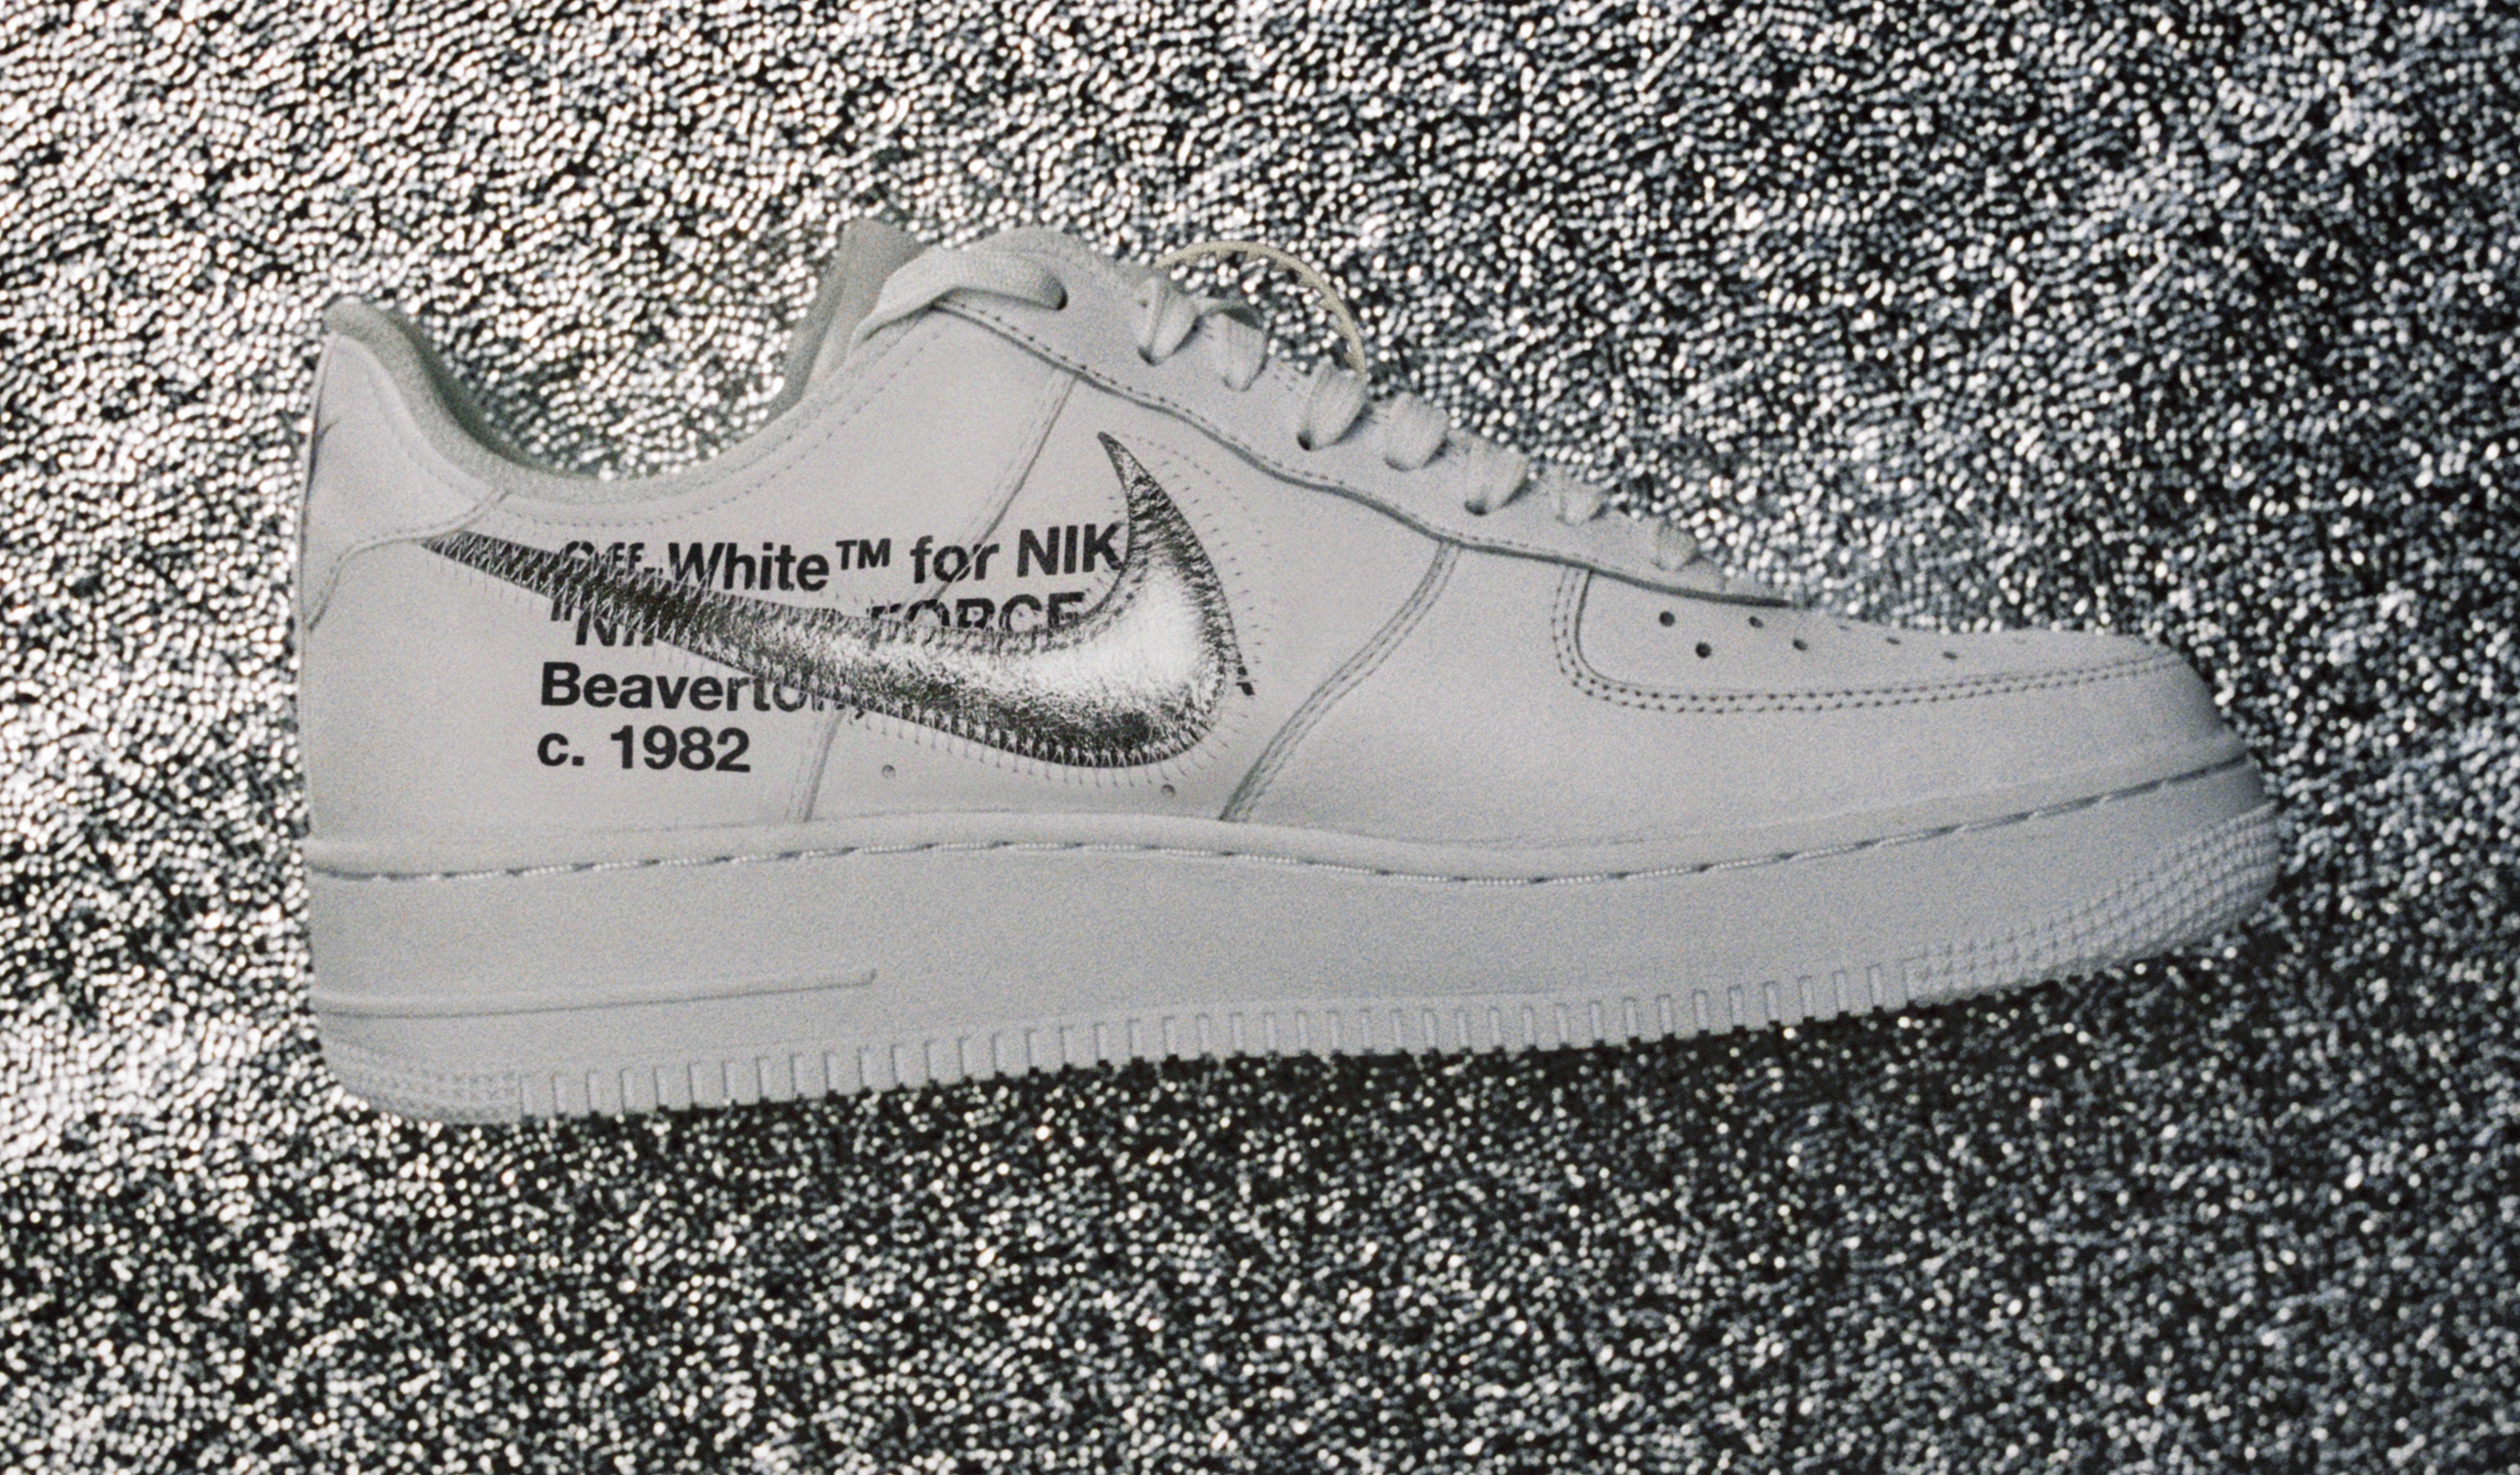 Complex Sneakers on X: The Louis Vuitton x Nike Air Force 1s by